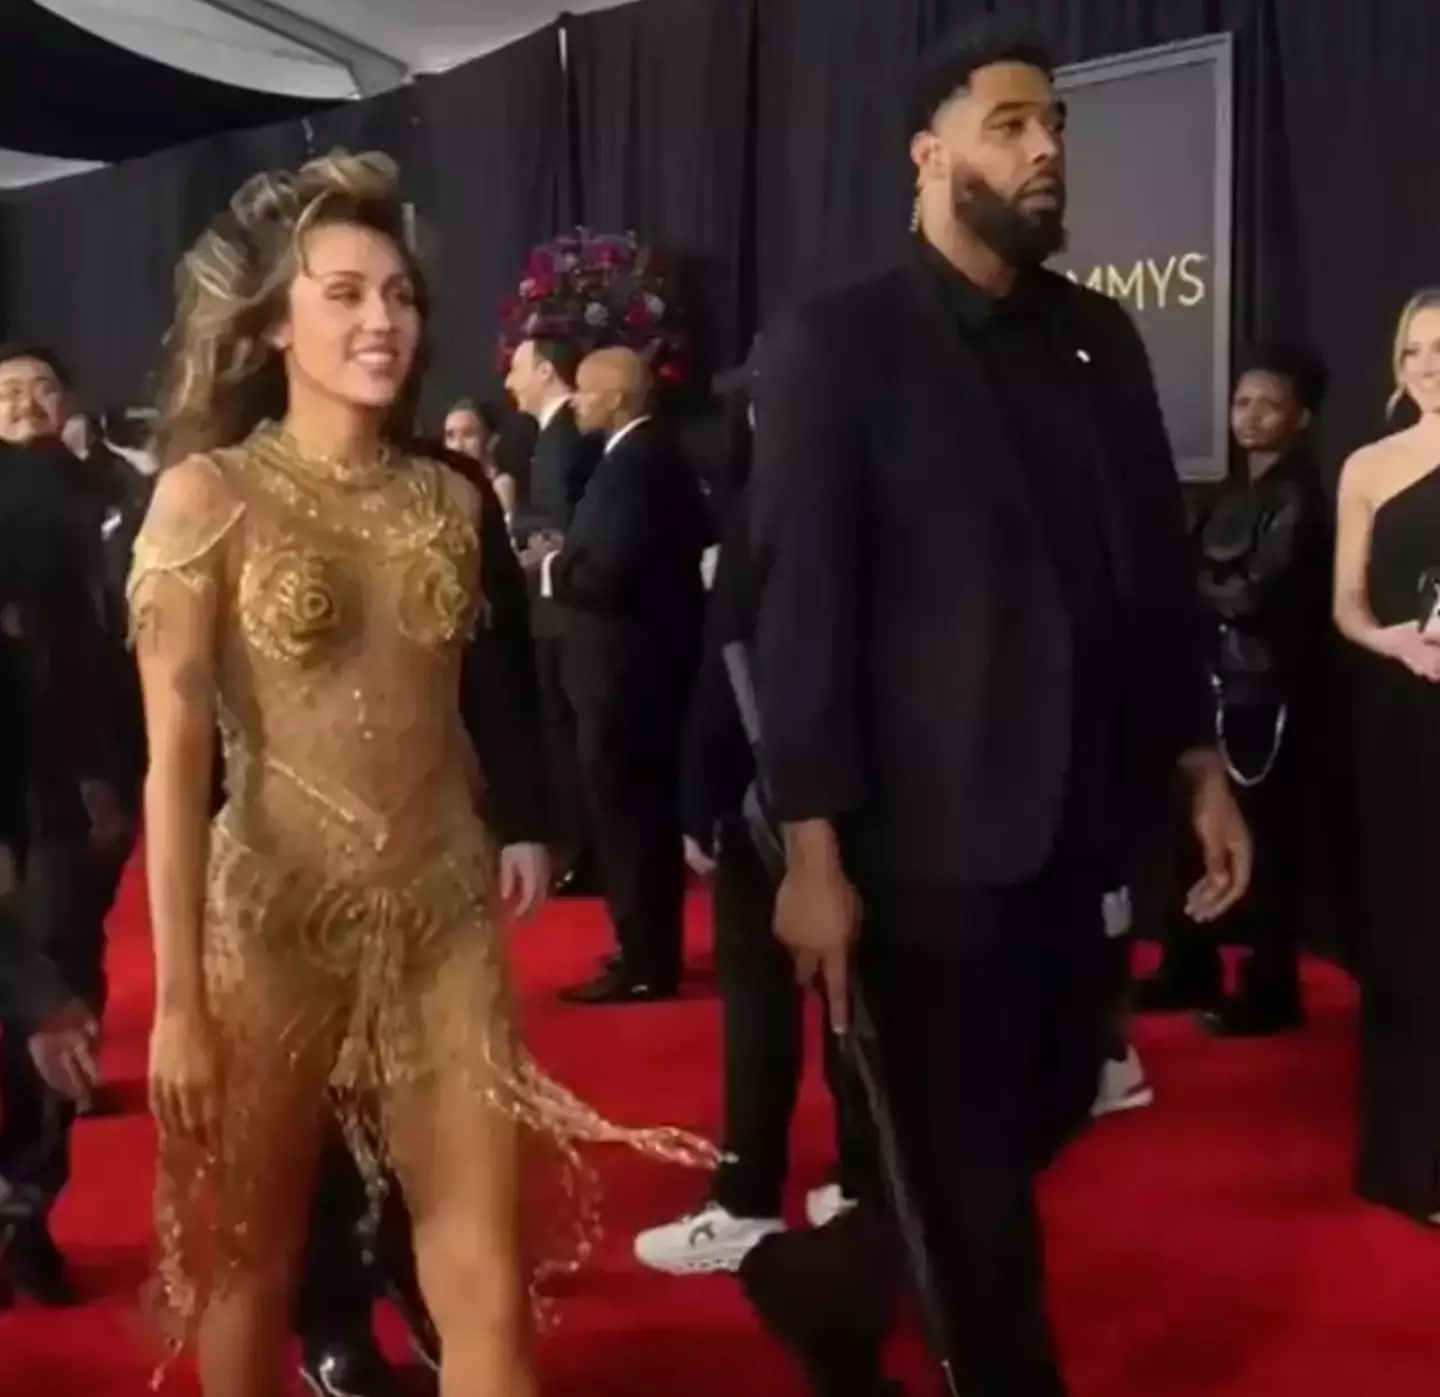 Fans noticed the umbrella Miley Cyrus' bodyguard was holding at the Grammys.